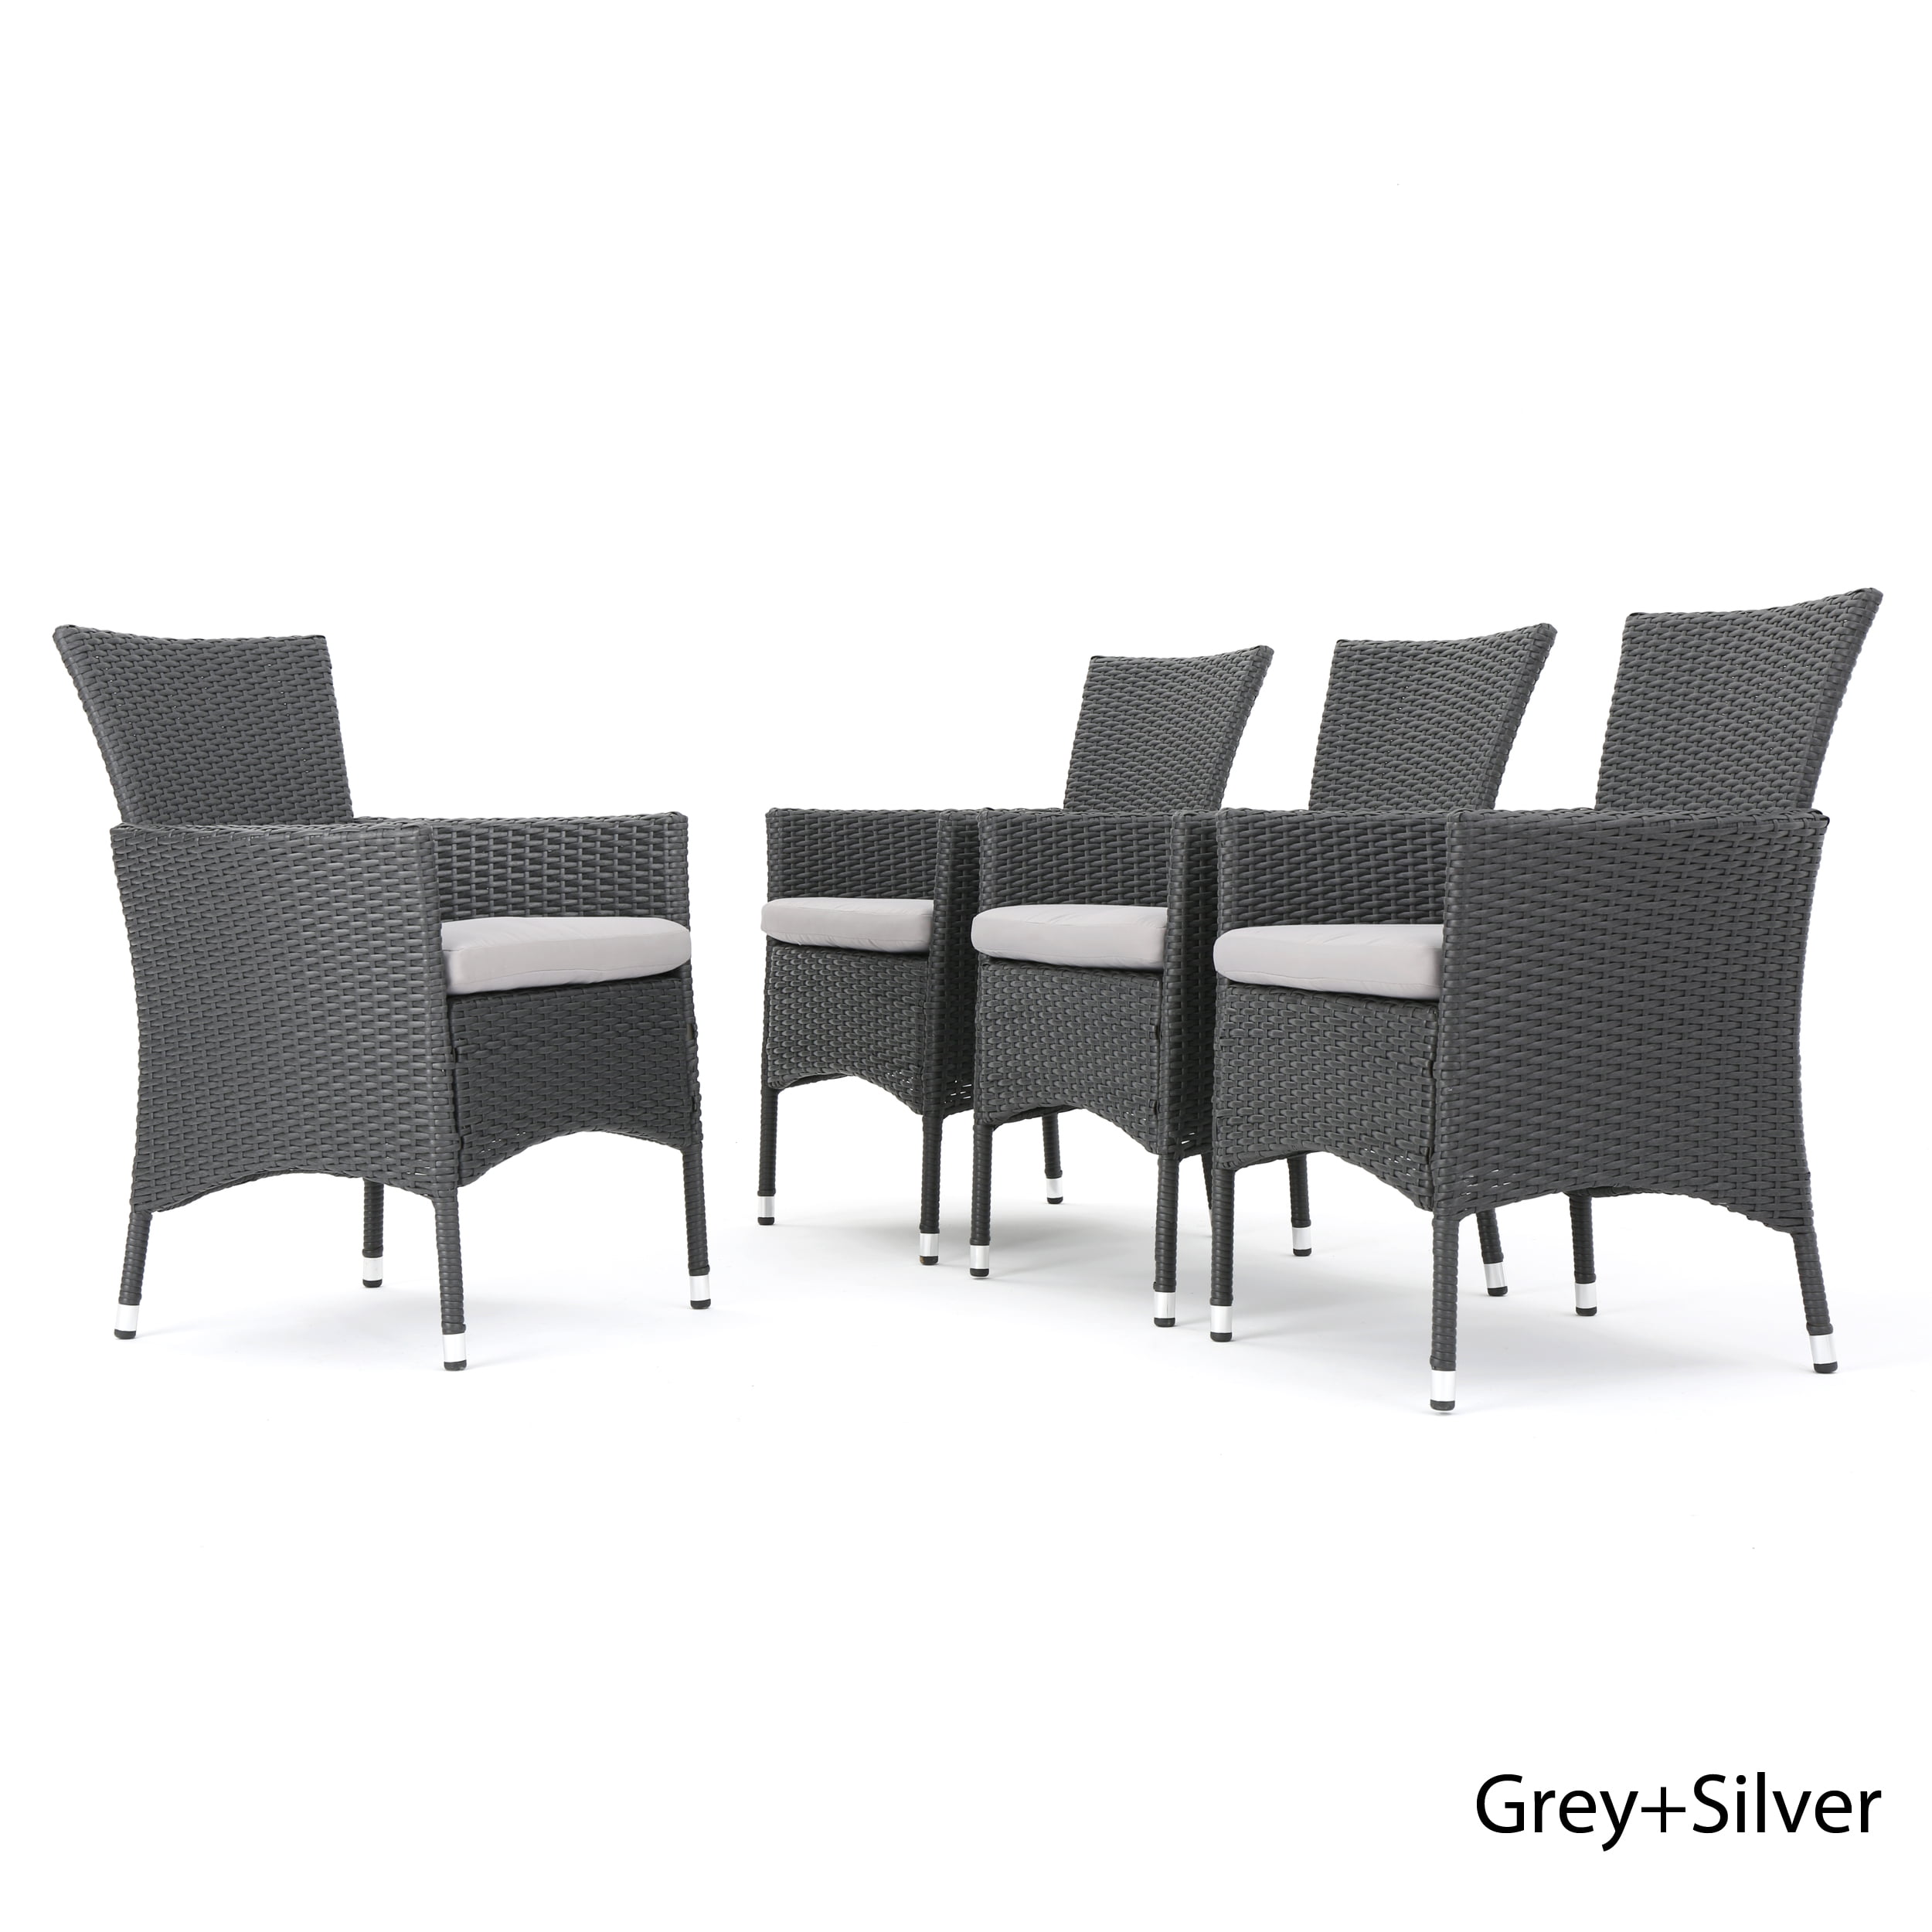 Grey Wicker Dining Chairs With Cushions, Grey Wicker Dining Chairs